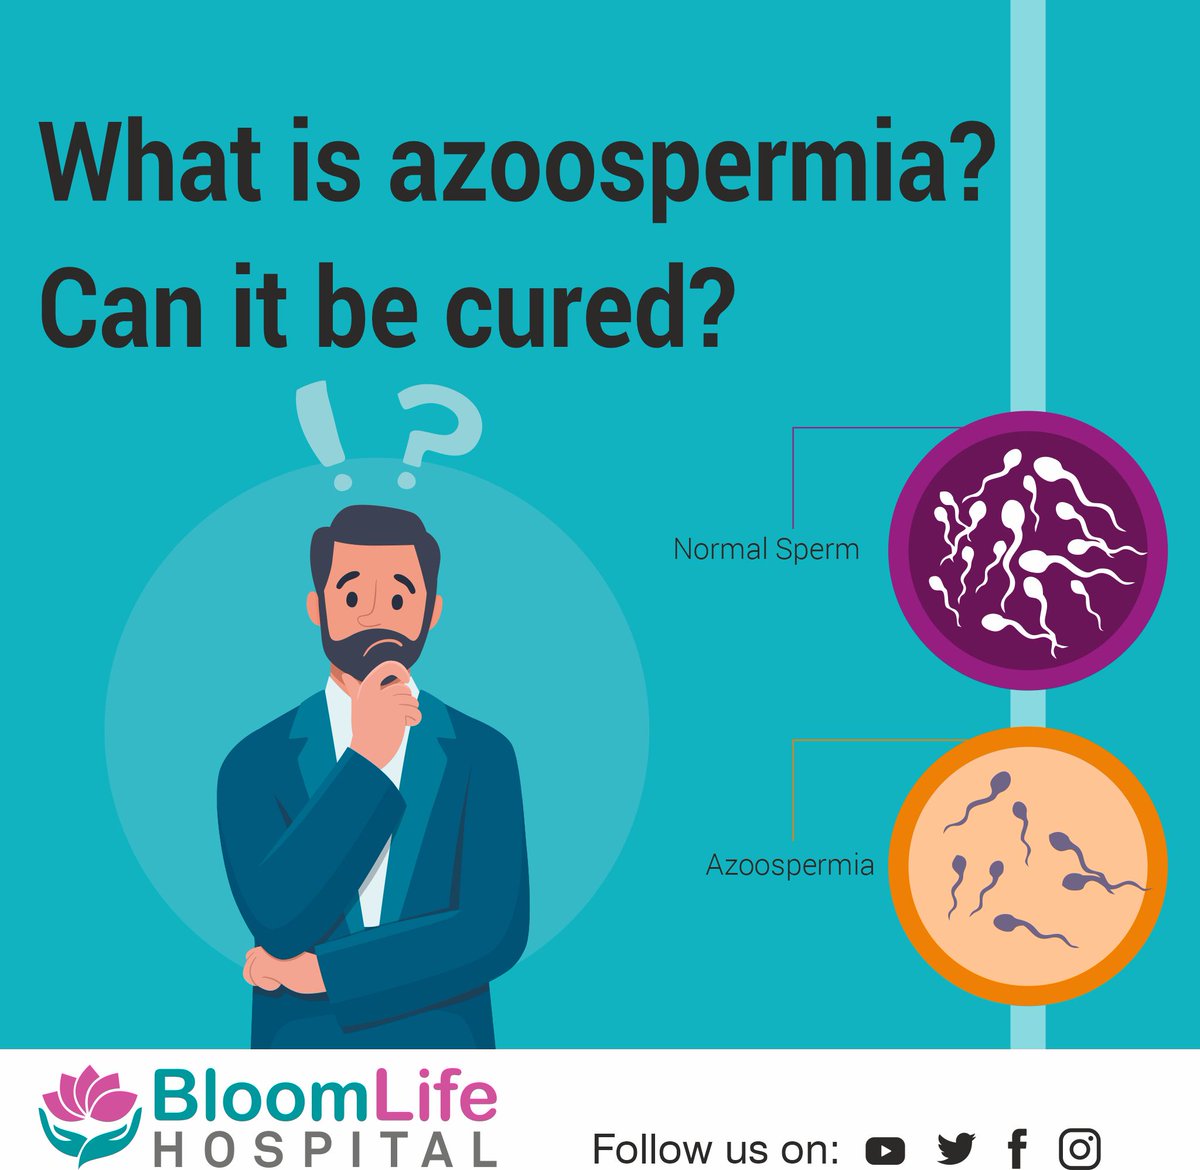 𝐖𝐡𝐚𝐭 𝐢𝐬 𝐚𝐳𝐨𝐨𝐬𝐩𝐞𝐫𝐦𝐢𝐚? 𝐂𝐚𝐧 𝐢𝐭 𝐛𝐞 𝐜𝐮𝐫𝐞𝐝?

Azoospermia refers to a lack of identifiable sperms in semen samples taken on two different occasions. This is one of the main causes of male infertility.

#Azoospermia #MaleInfertility #FertilityIssues